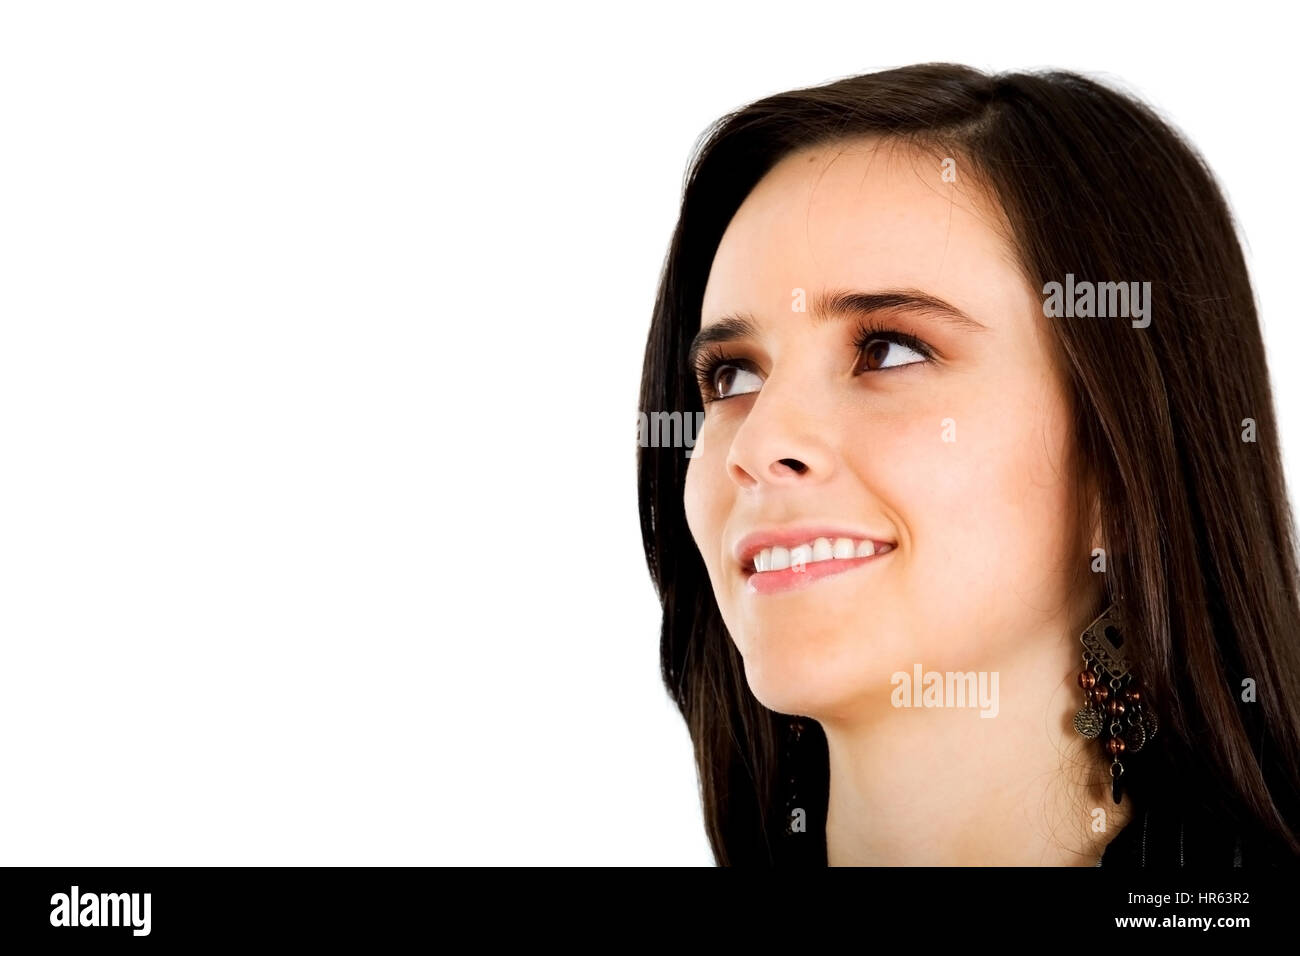 Business woman portrait thinking of ideas - isolated over a white background Stock Photo